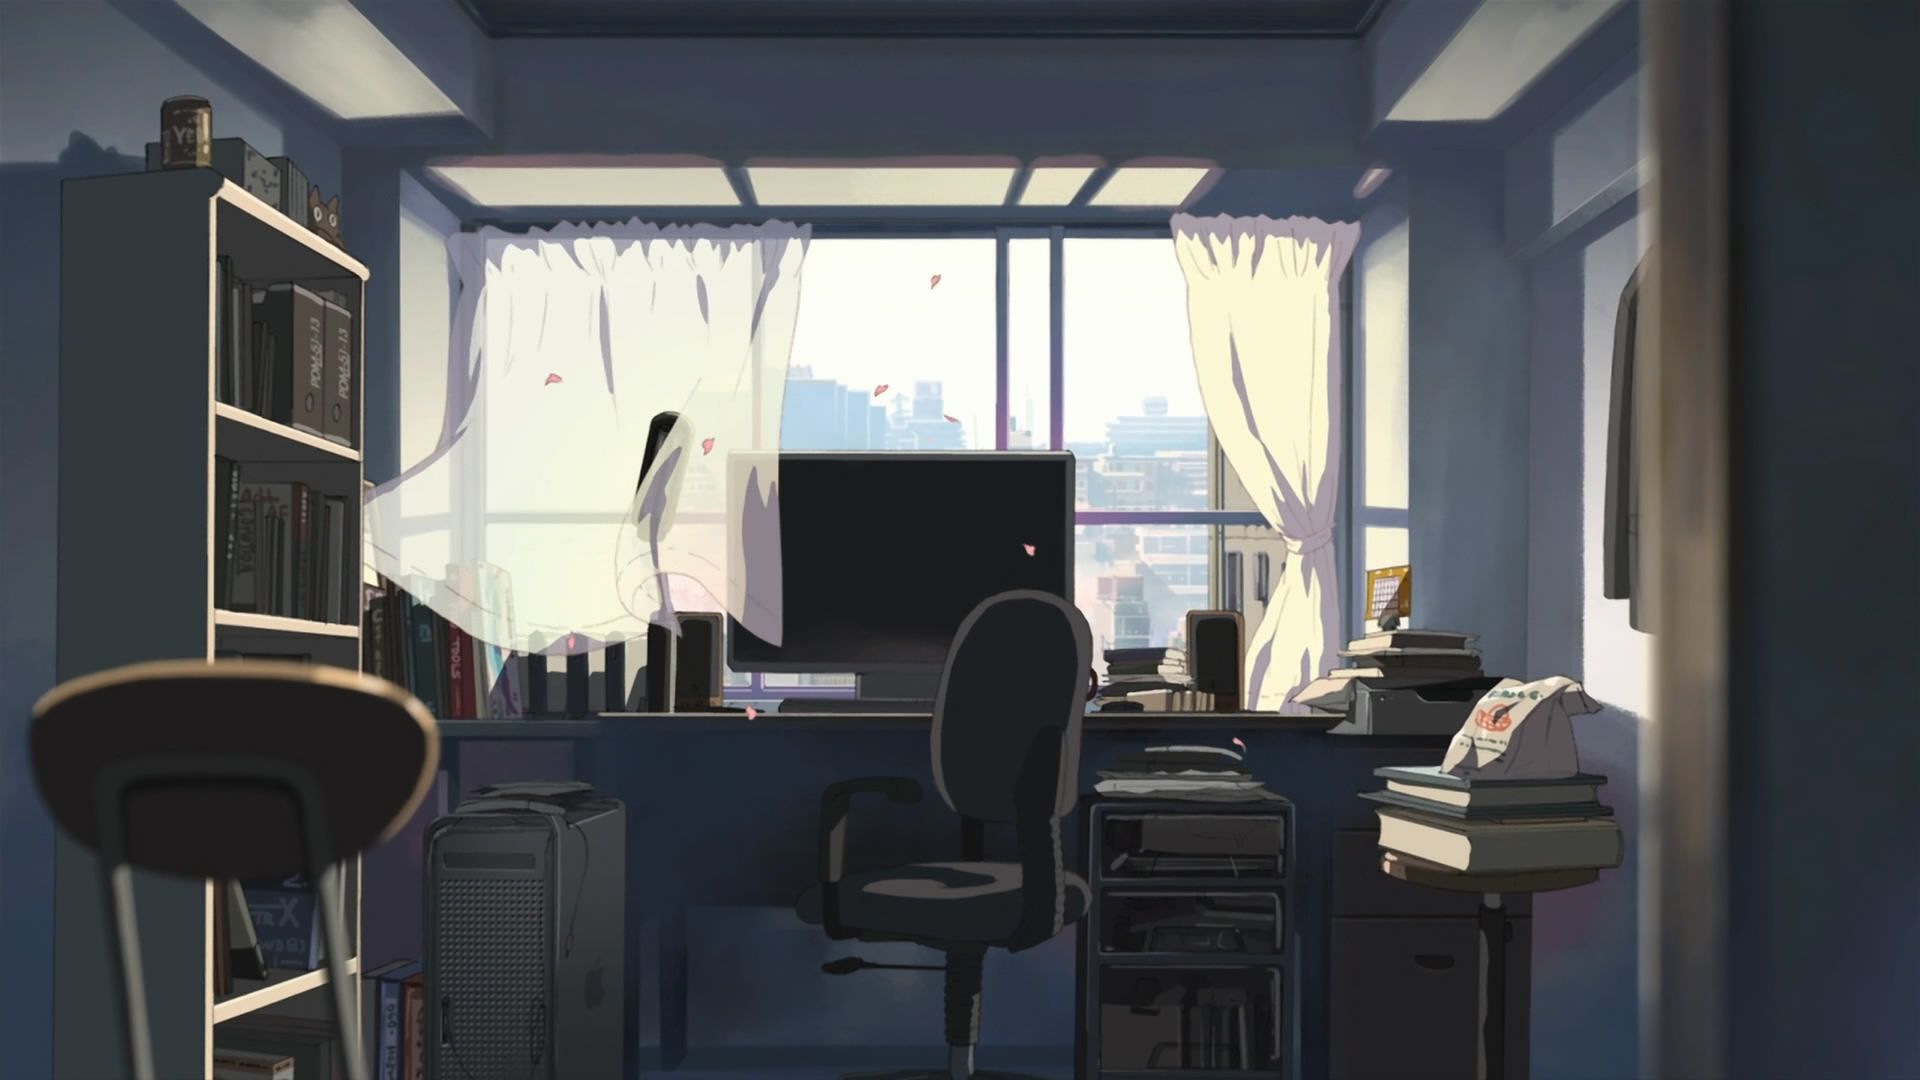 Centimeters Per Second. Anime scenery wallpaper, Anime scenery, Animation background